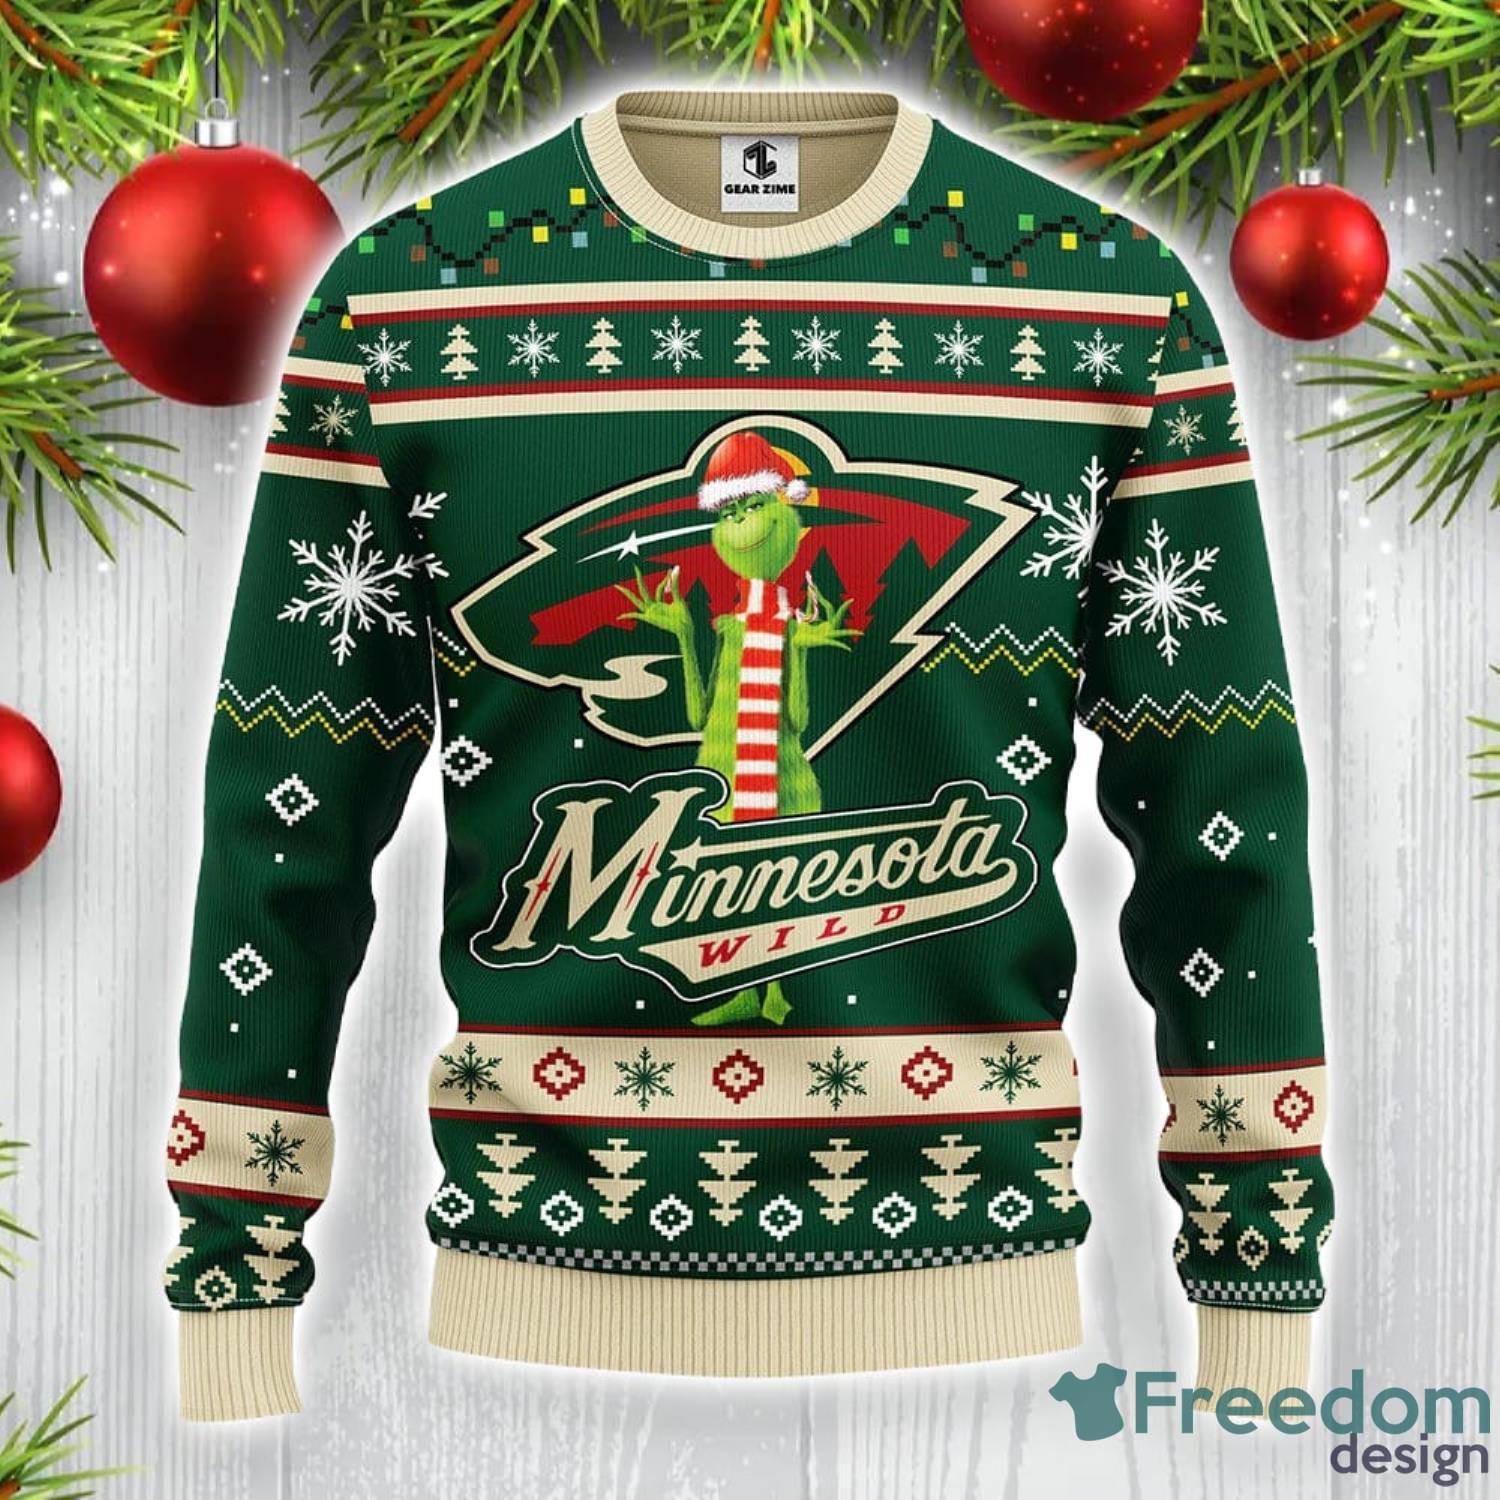 For NHL Fans Minnesota Wild Grinch Hand Funny Men And Women Christmas Gift  3D Ugly Christmas Sweater - Banantees